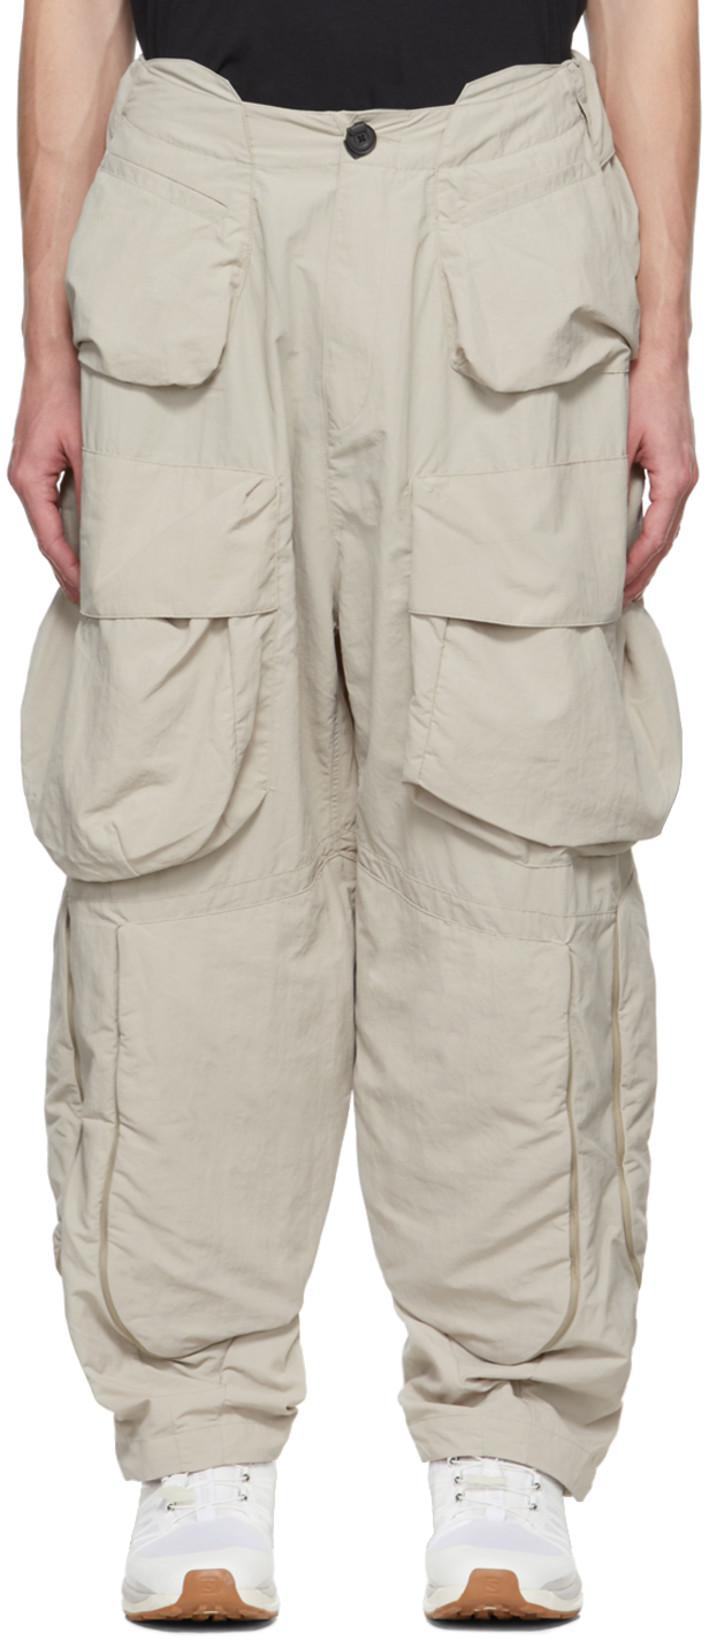 Gray Switchable Cover Cargo Pants by ARCHIVAL REINVENT